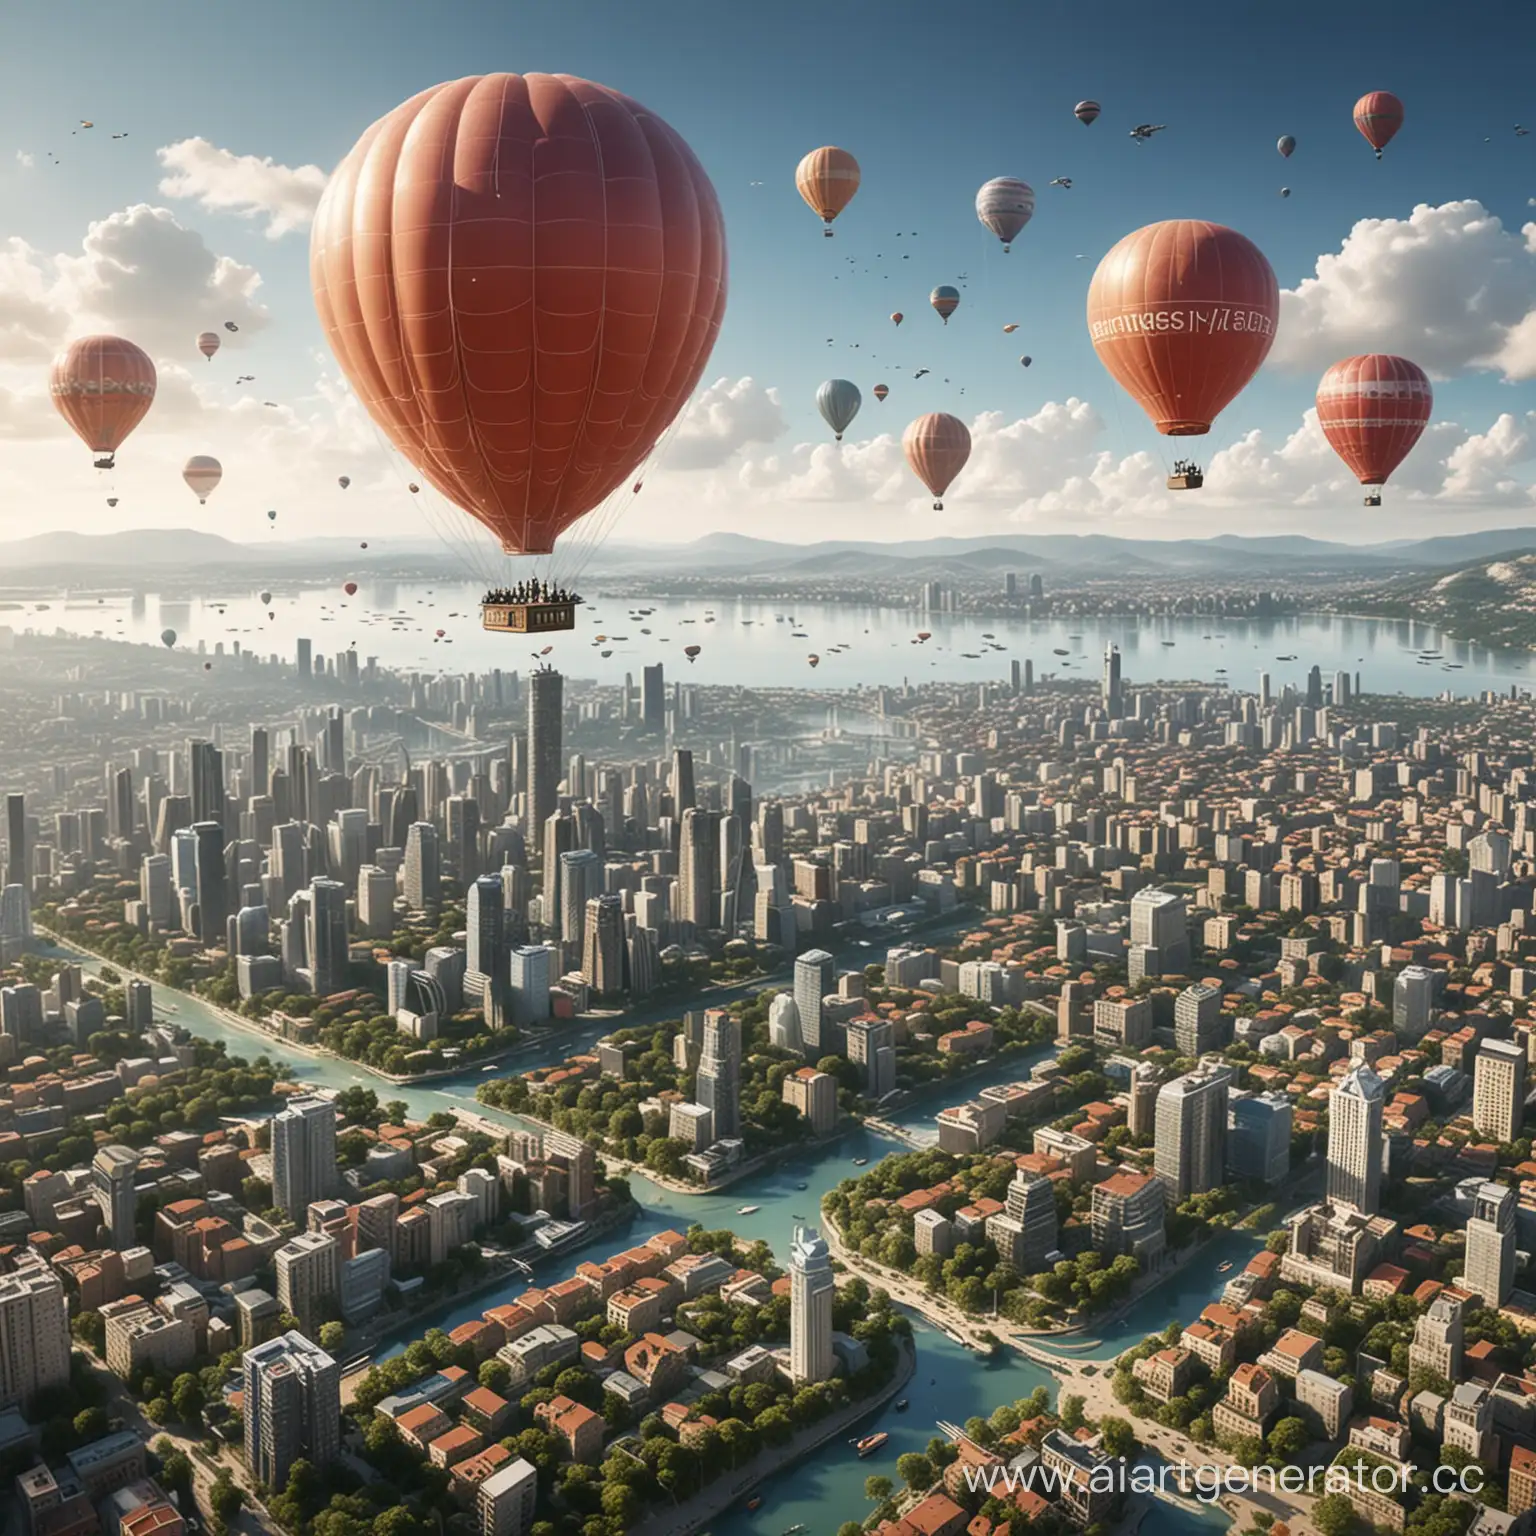 Fantastical-Floating-Balloon-City-with-Advanced-Robotics-and-Greenery